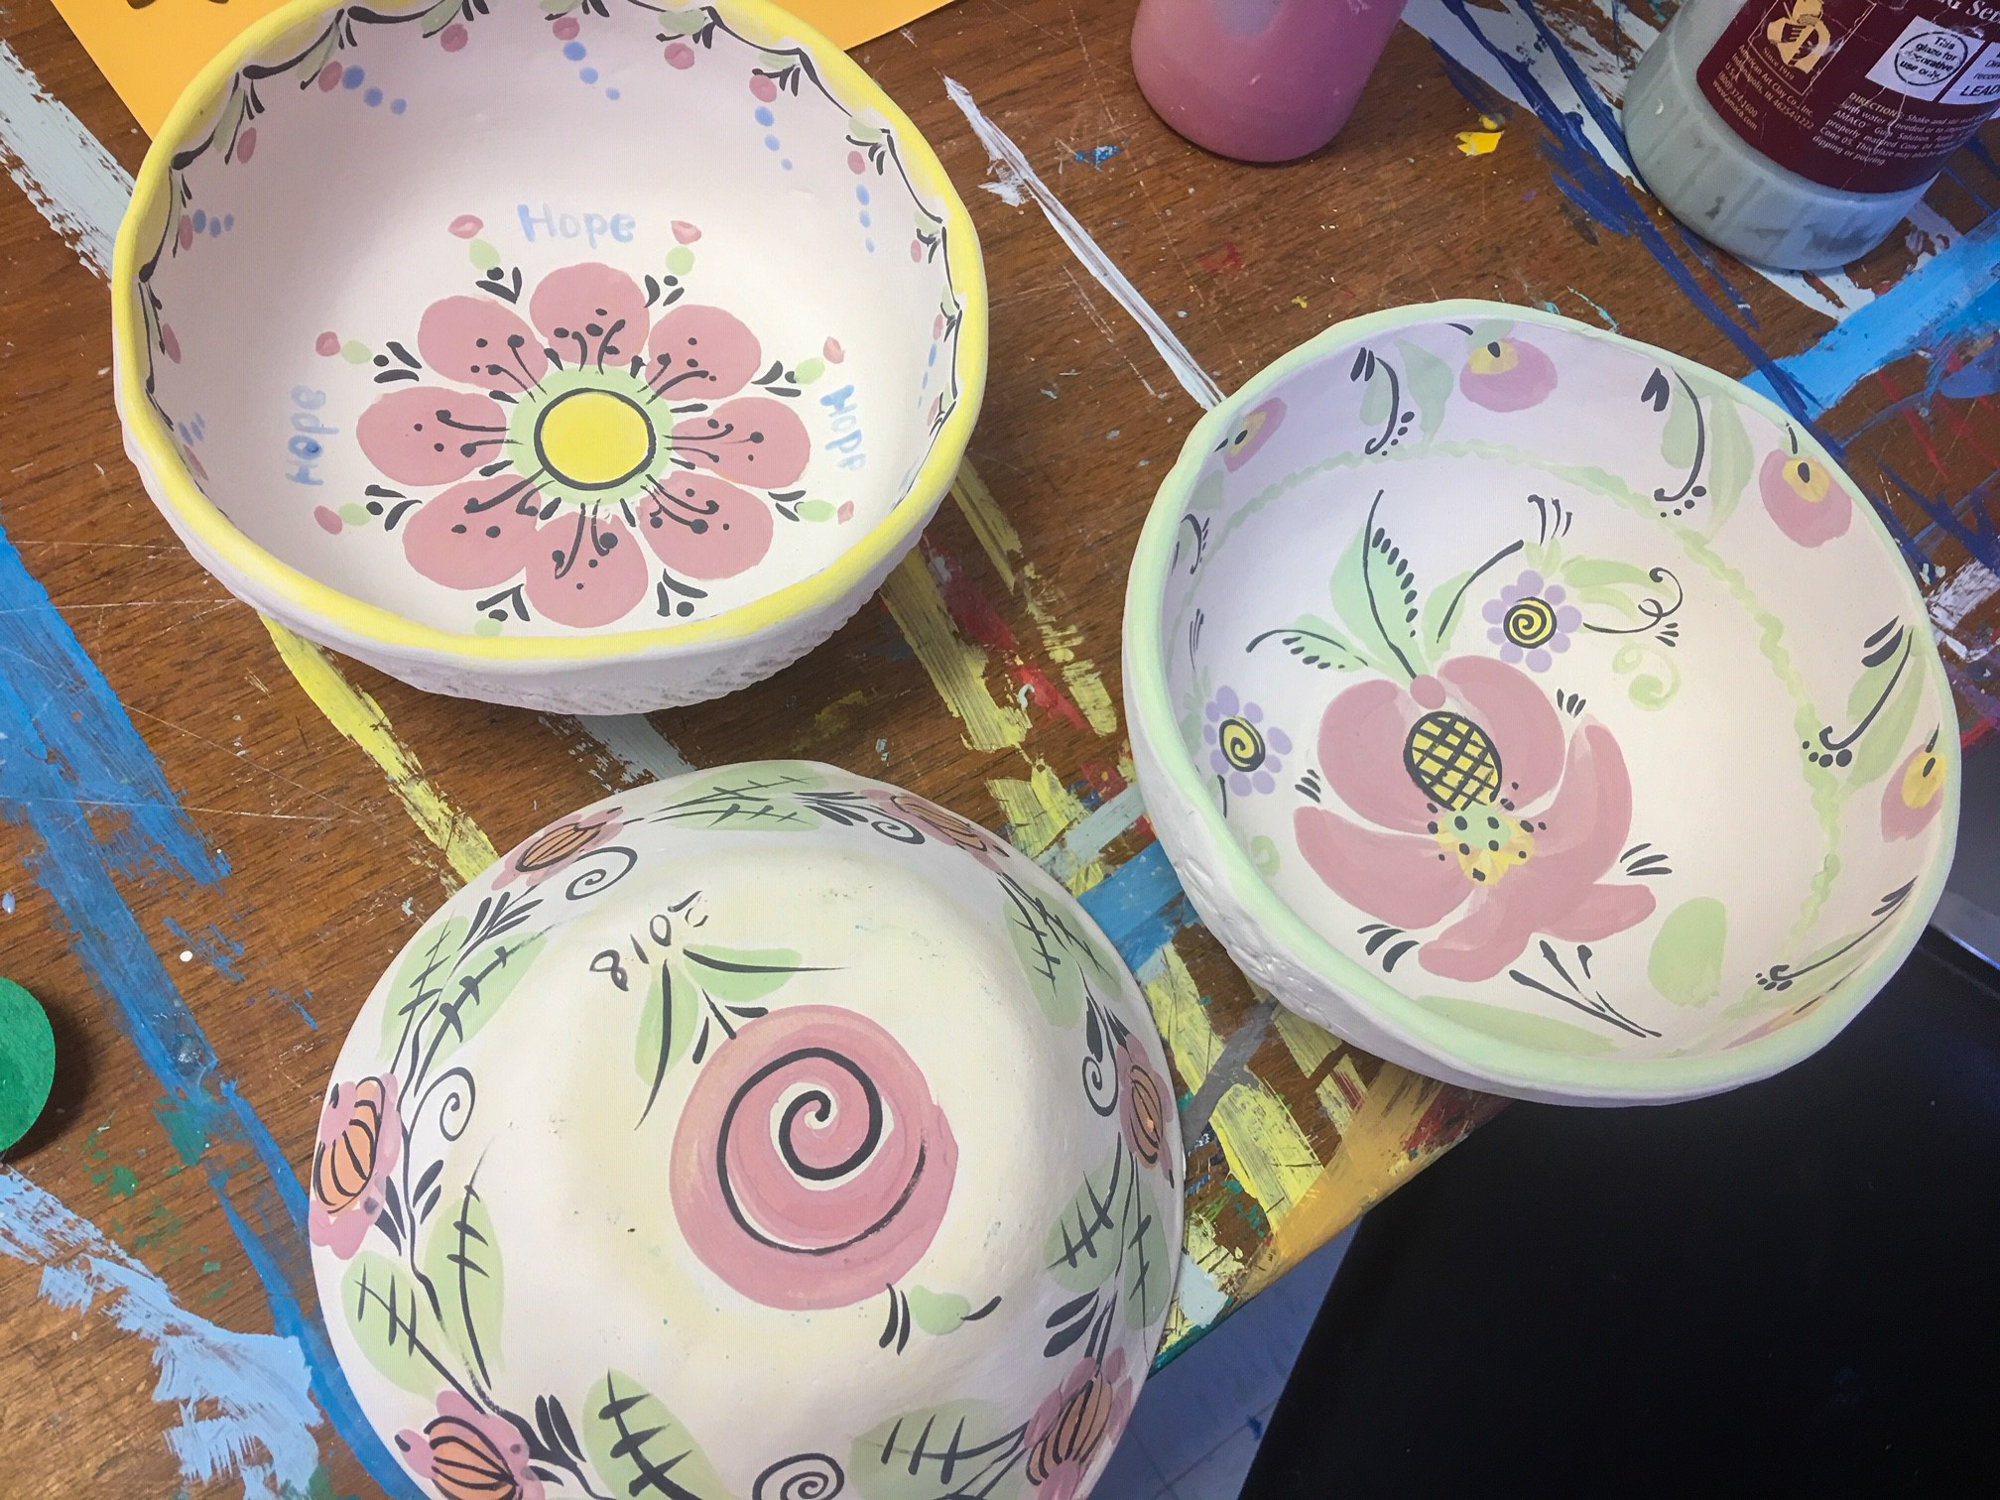 A selection of ceramic bowls one can choose from at this year's Bowls of Hope event. 